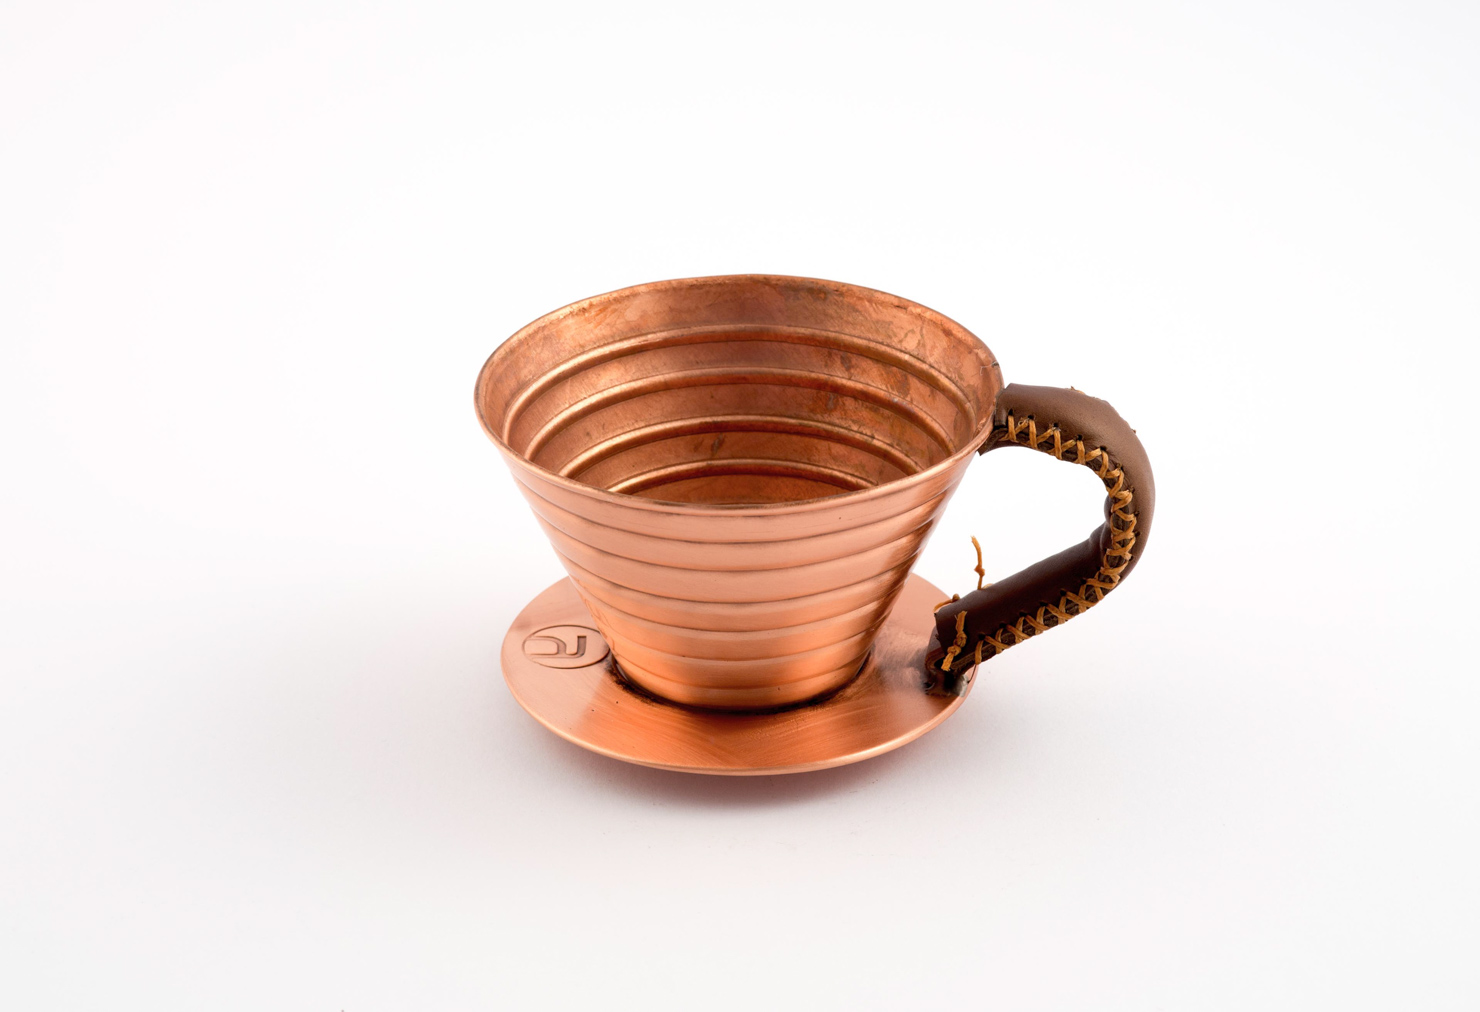 artisansmith charlie luong copper pour over espresso coffee kettle pitcher craftsmen sprudge